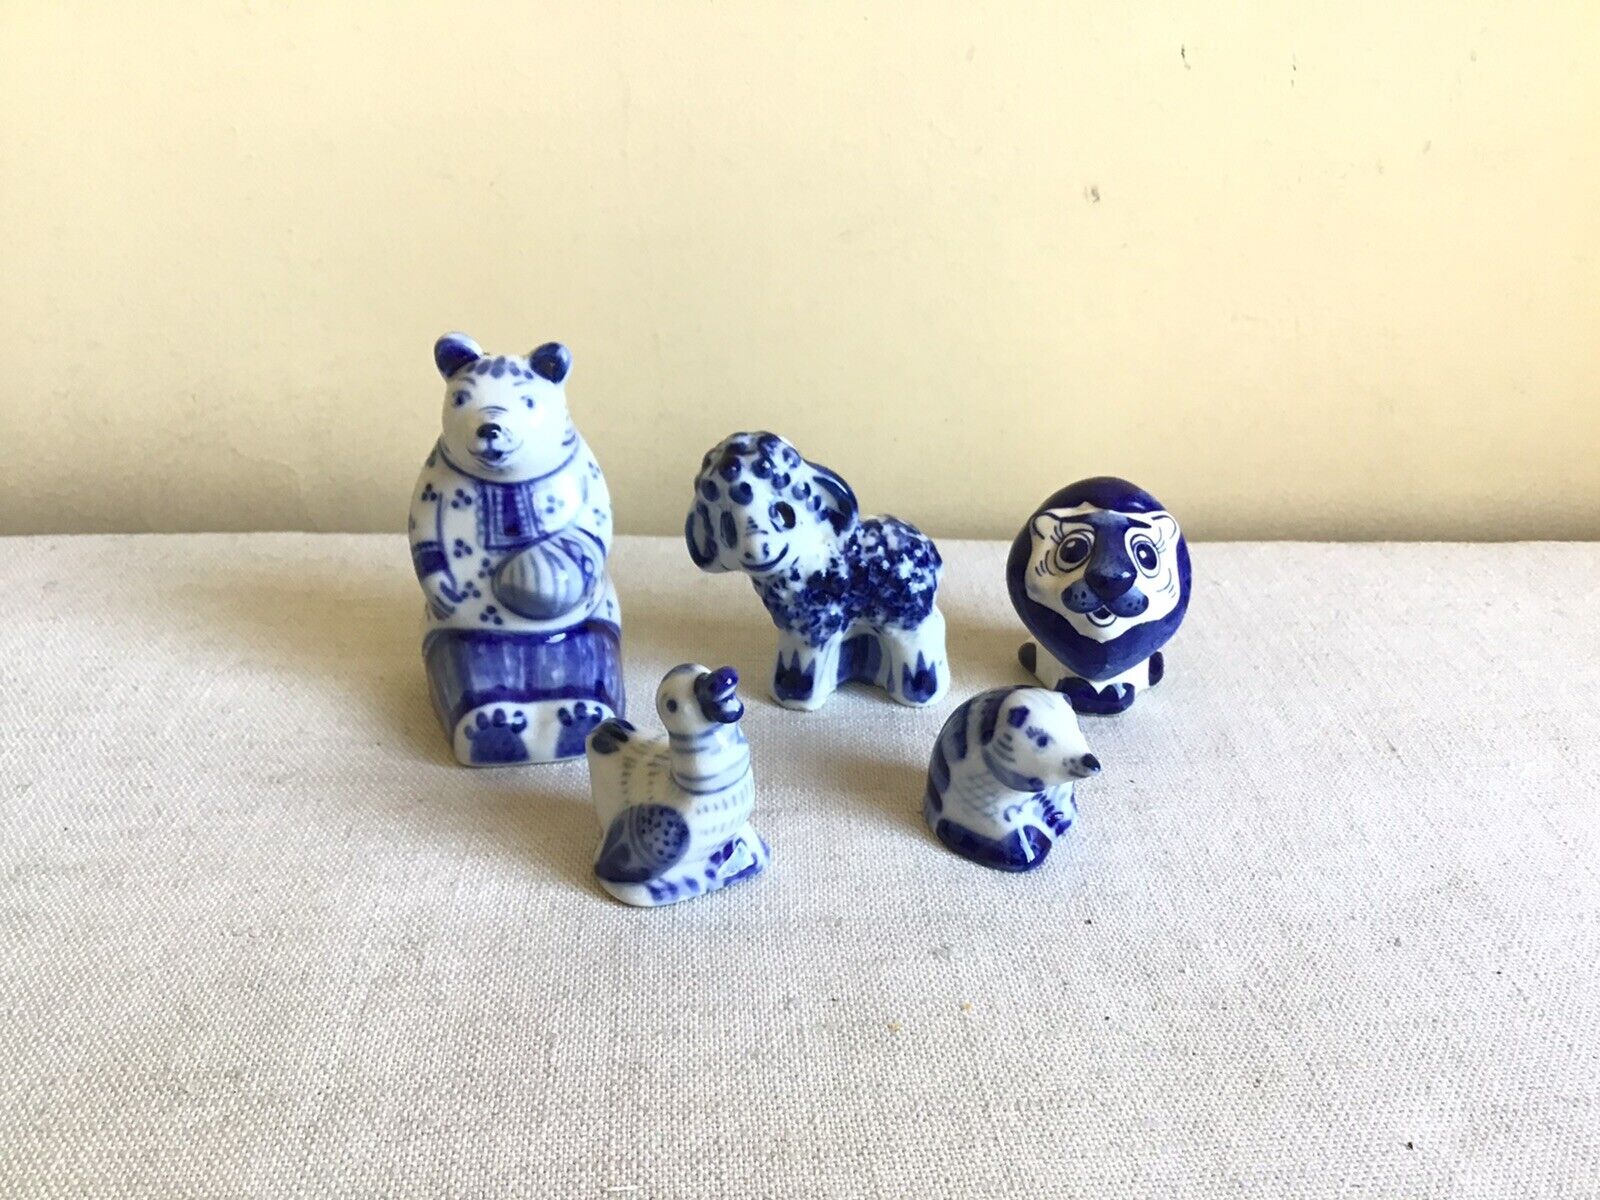 Mixed Lot Of 5 GZHEL Russian Hand Painted Blue White Porcelain Animal Figurines